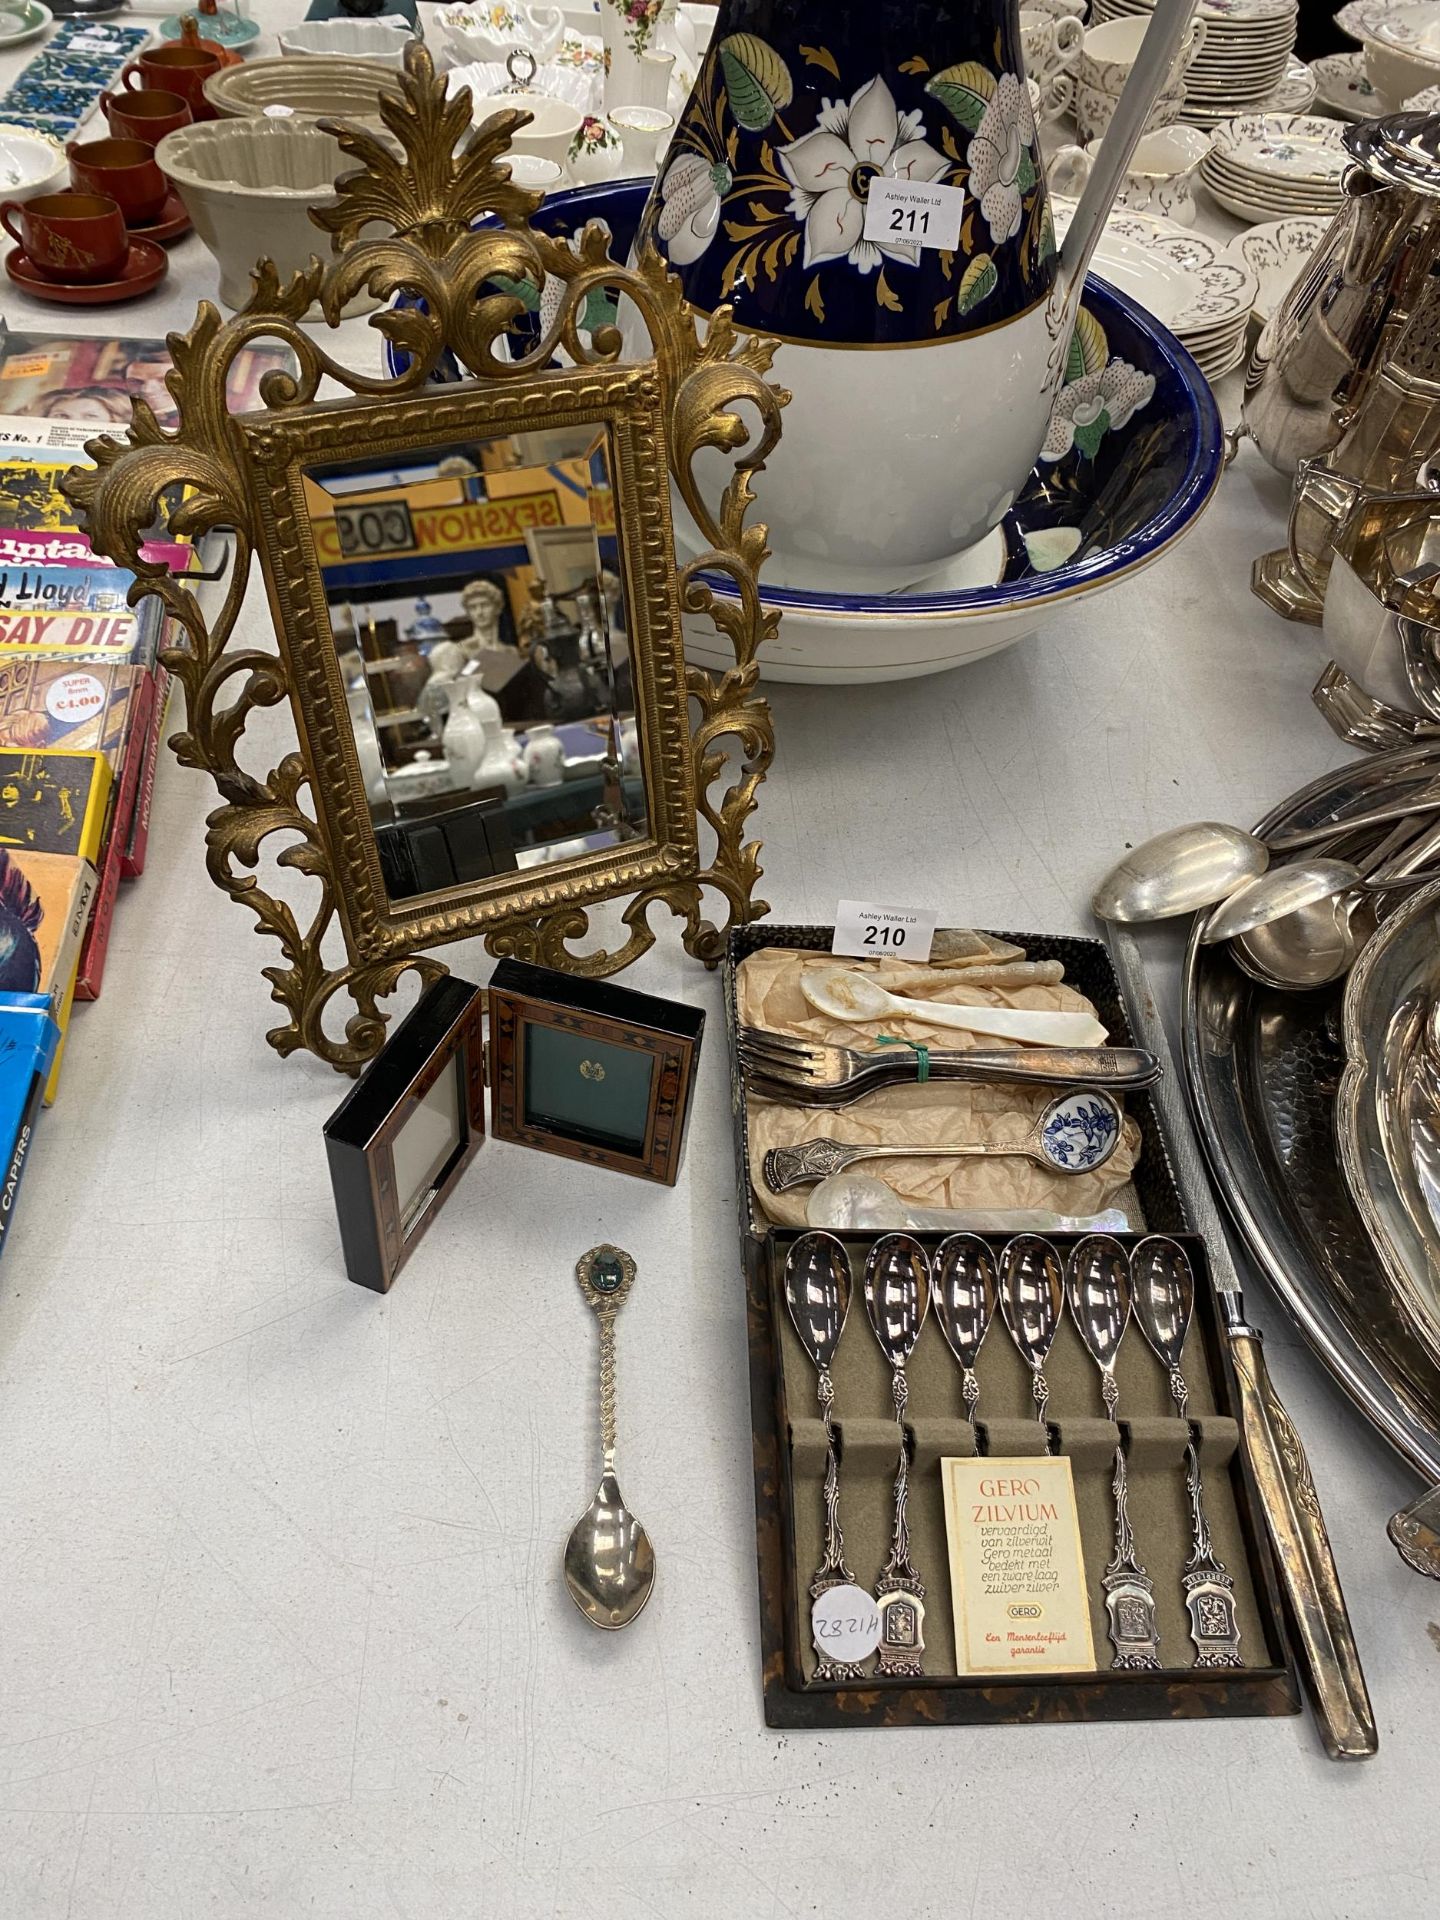 A BRASS MIRROR WITH BEVELLED GLASS, WOOD PICTURE FRAME, SPOON SET, KNIFE SHARPENER, ETC